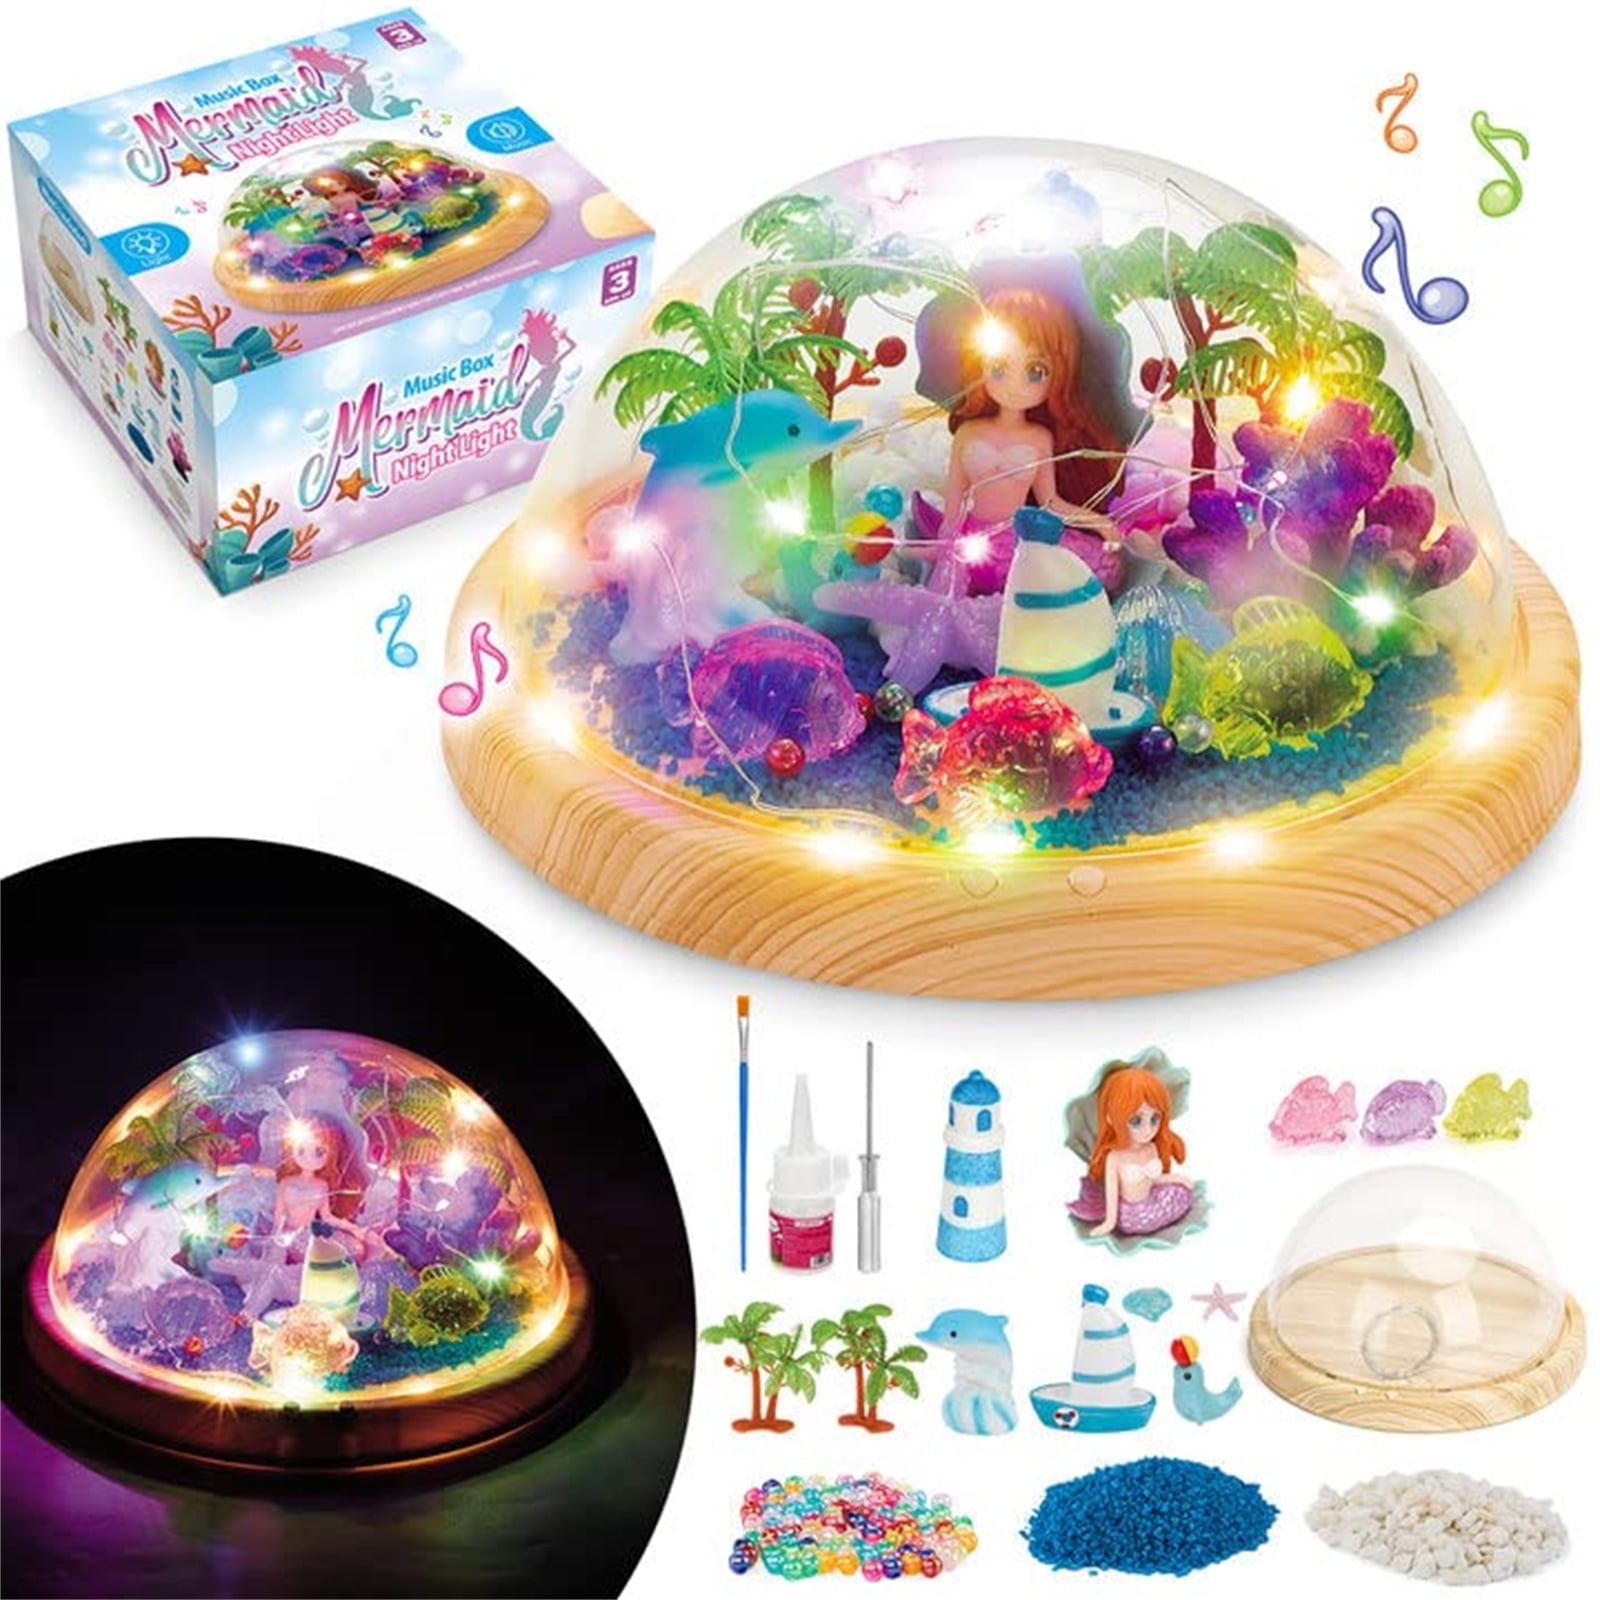  Mermaid Toy Lantern Night Light Craft Kit, Birthday Gifts for  Kids, DIY Mermaids Arts and Crafts, Gift for Girls Ages 3 4 5 6 7 8-12  Years, Stem Toys : Clothing, Shoes & Jewelry